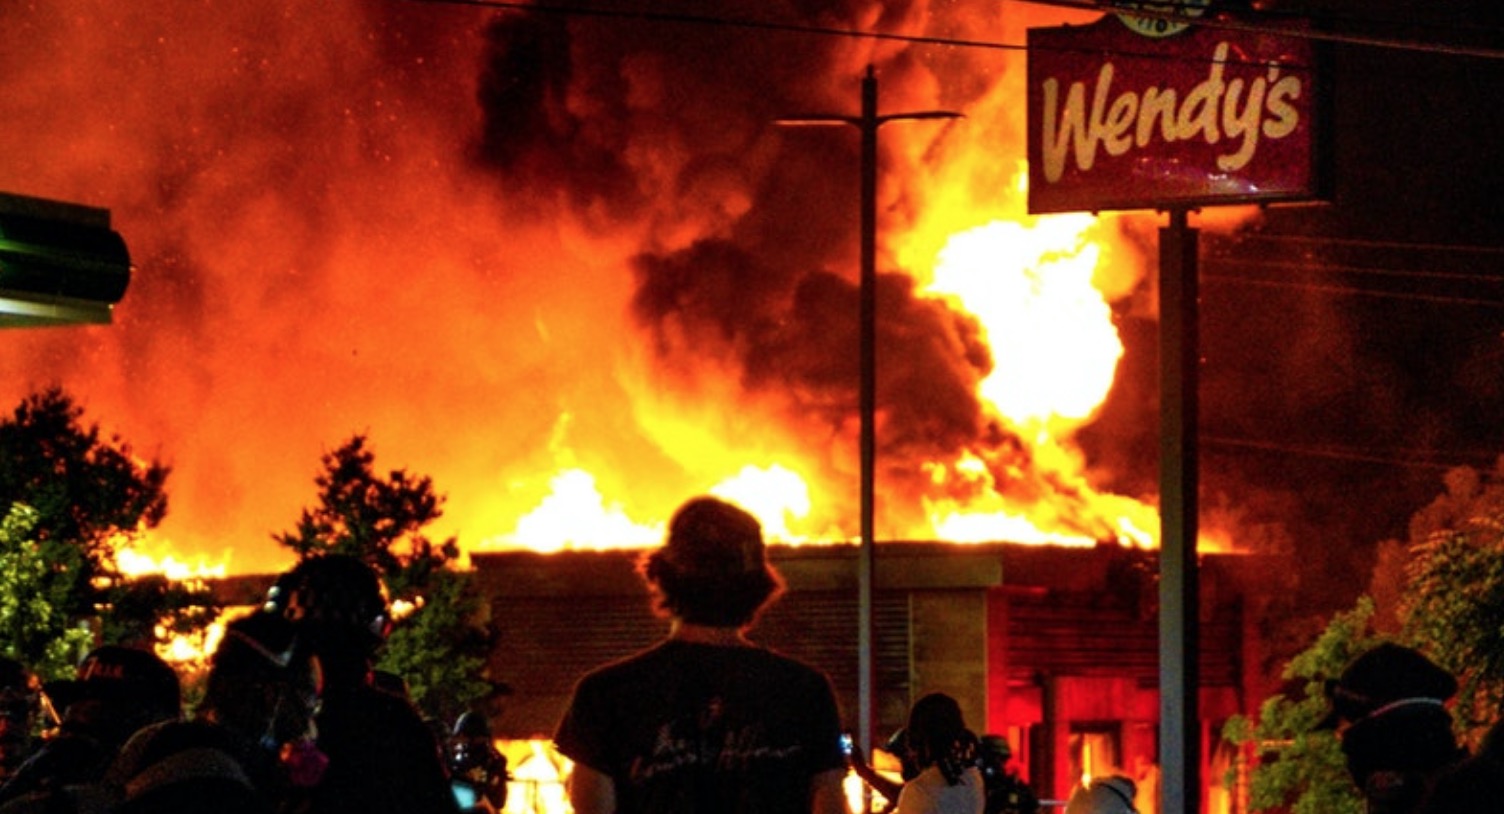 Wendy's in Atlanta Burn Down after another Fatal Police Shooting